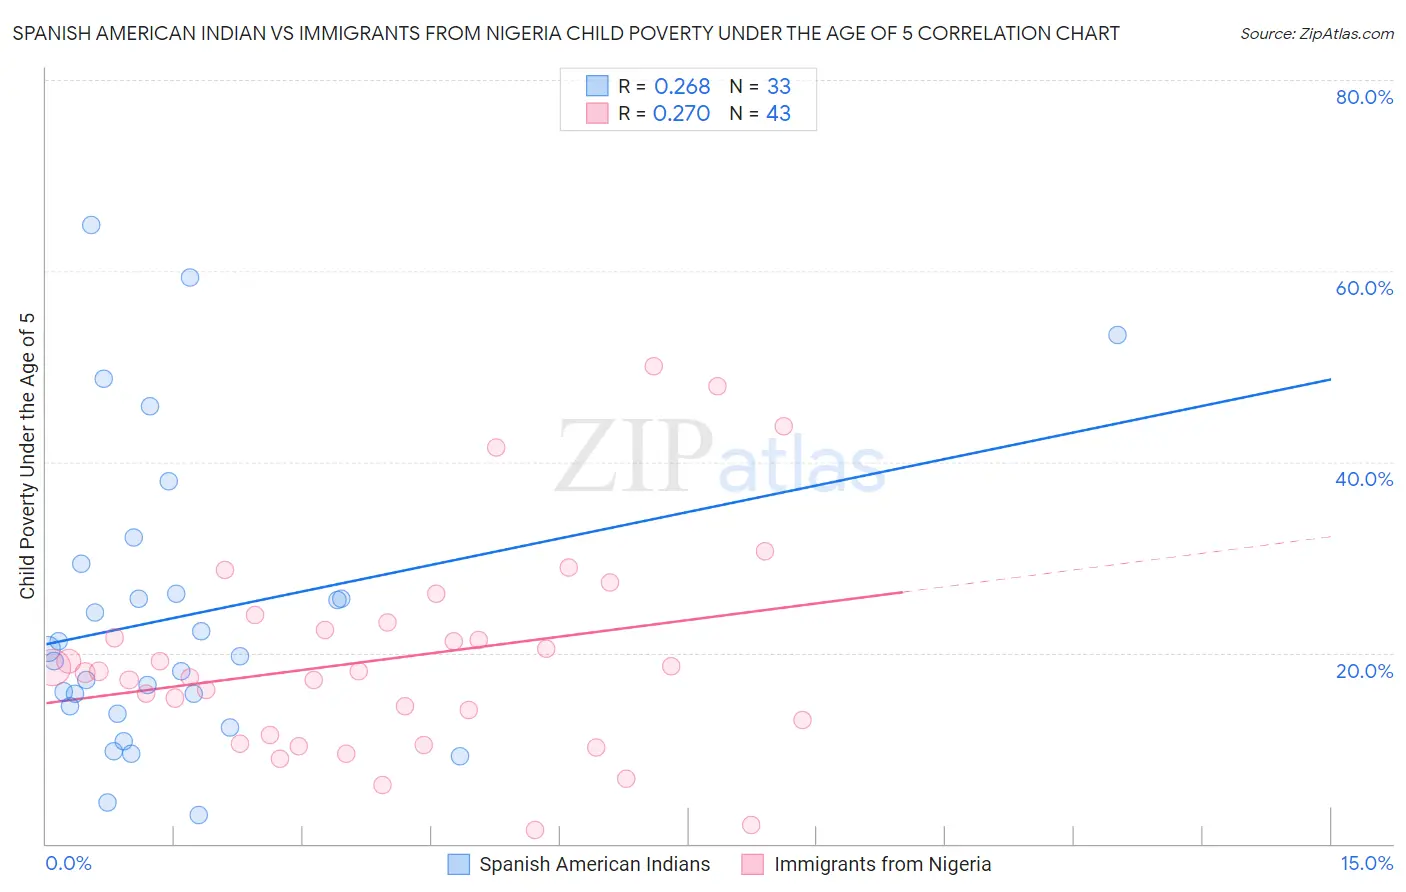 Spanish American Indian vs Immigrants from Nigeria Child Poverty Under the Age of 5